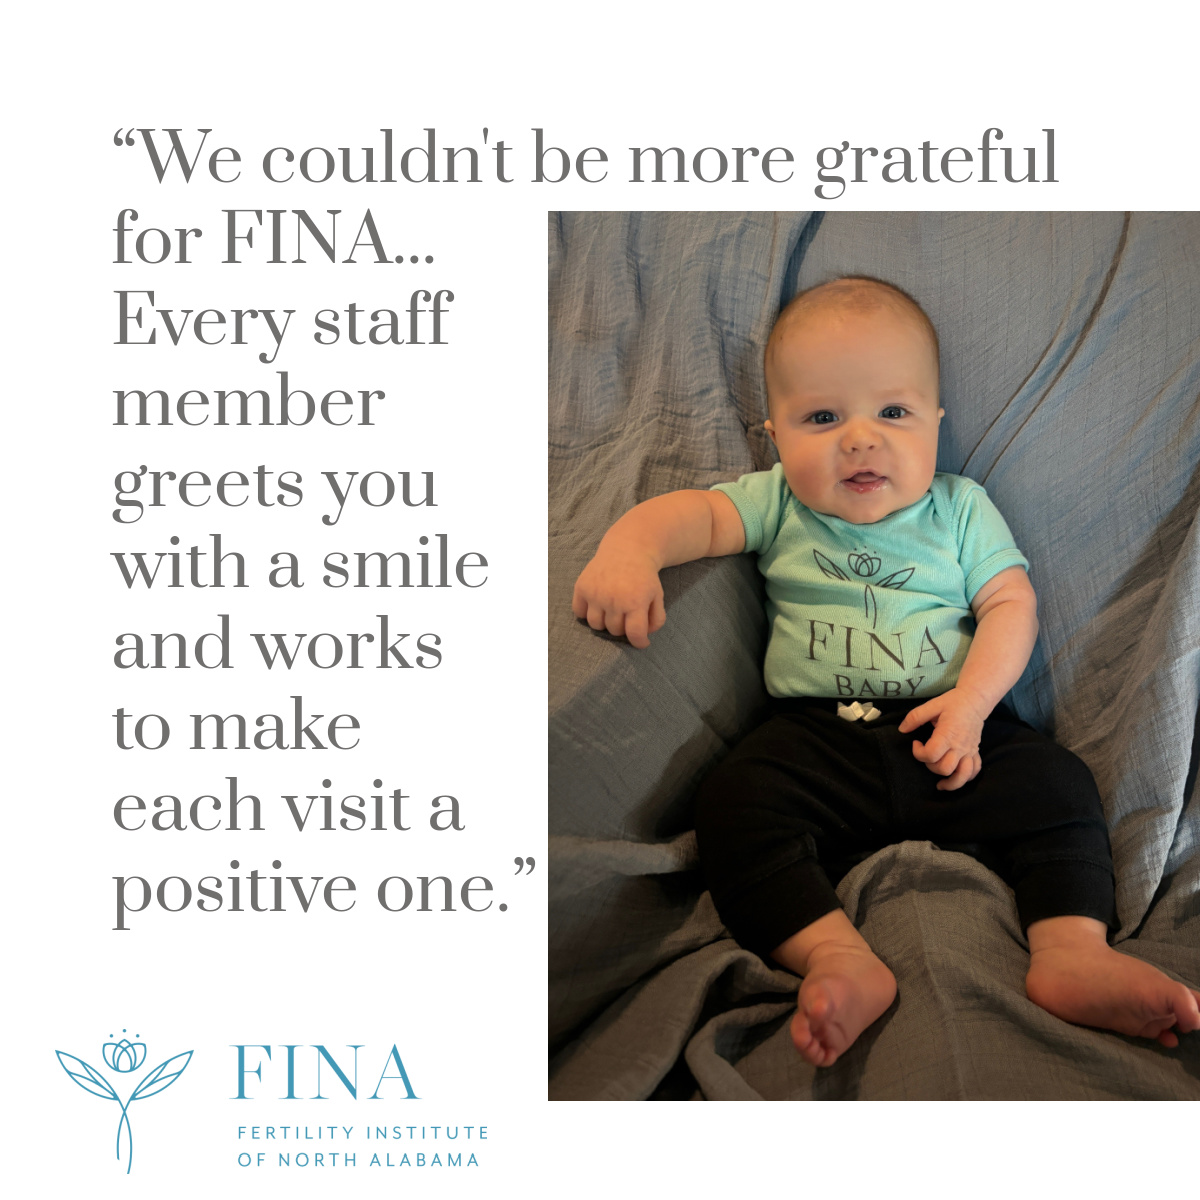 A sweet FINA baby and his family’s story…